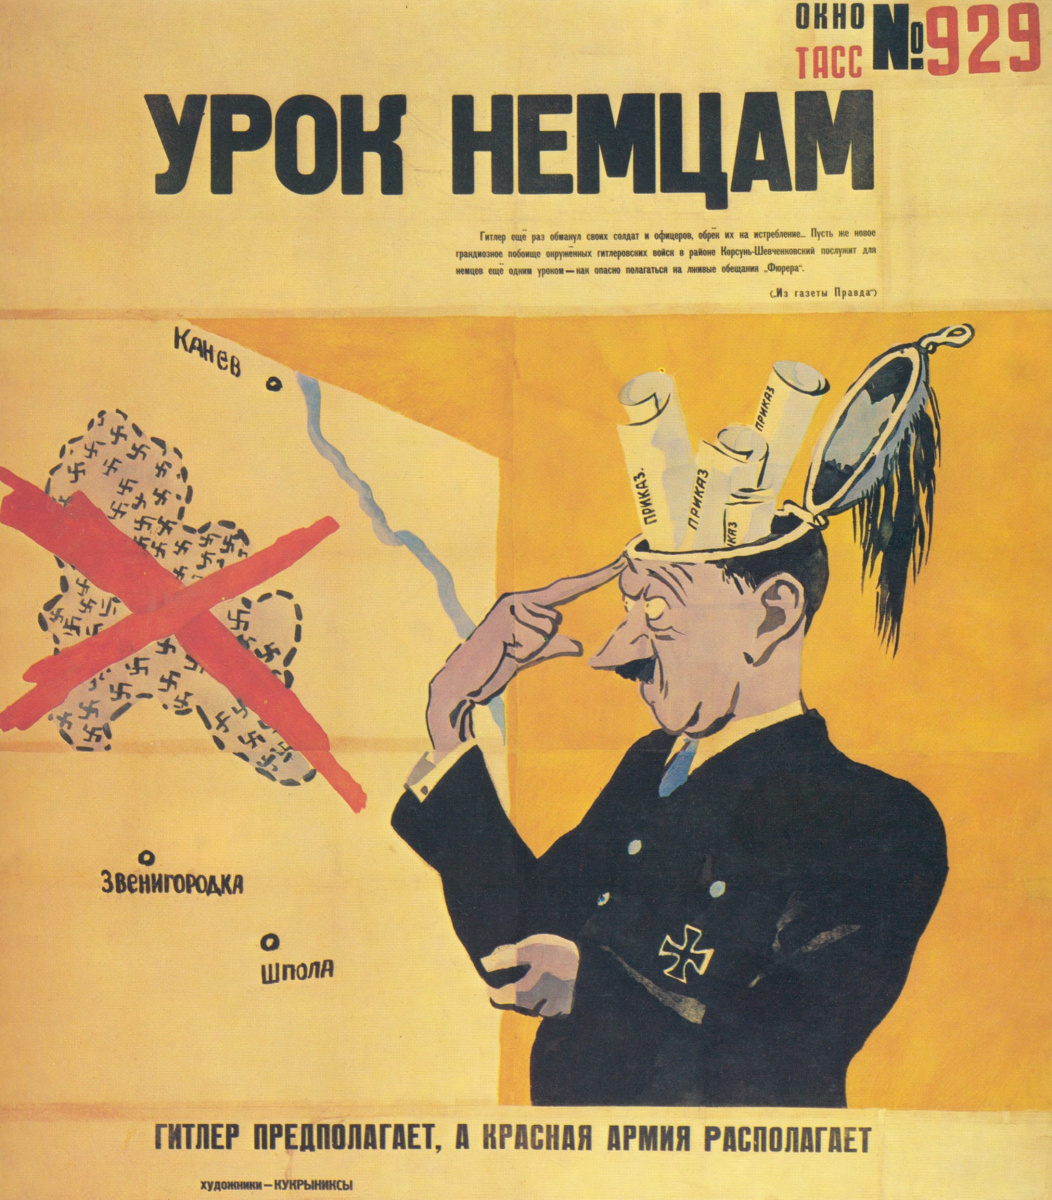 Kukryniksy. The lesson the Germans. Window of TASS № 929. Hitler proposes and the Red army has